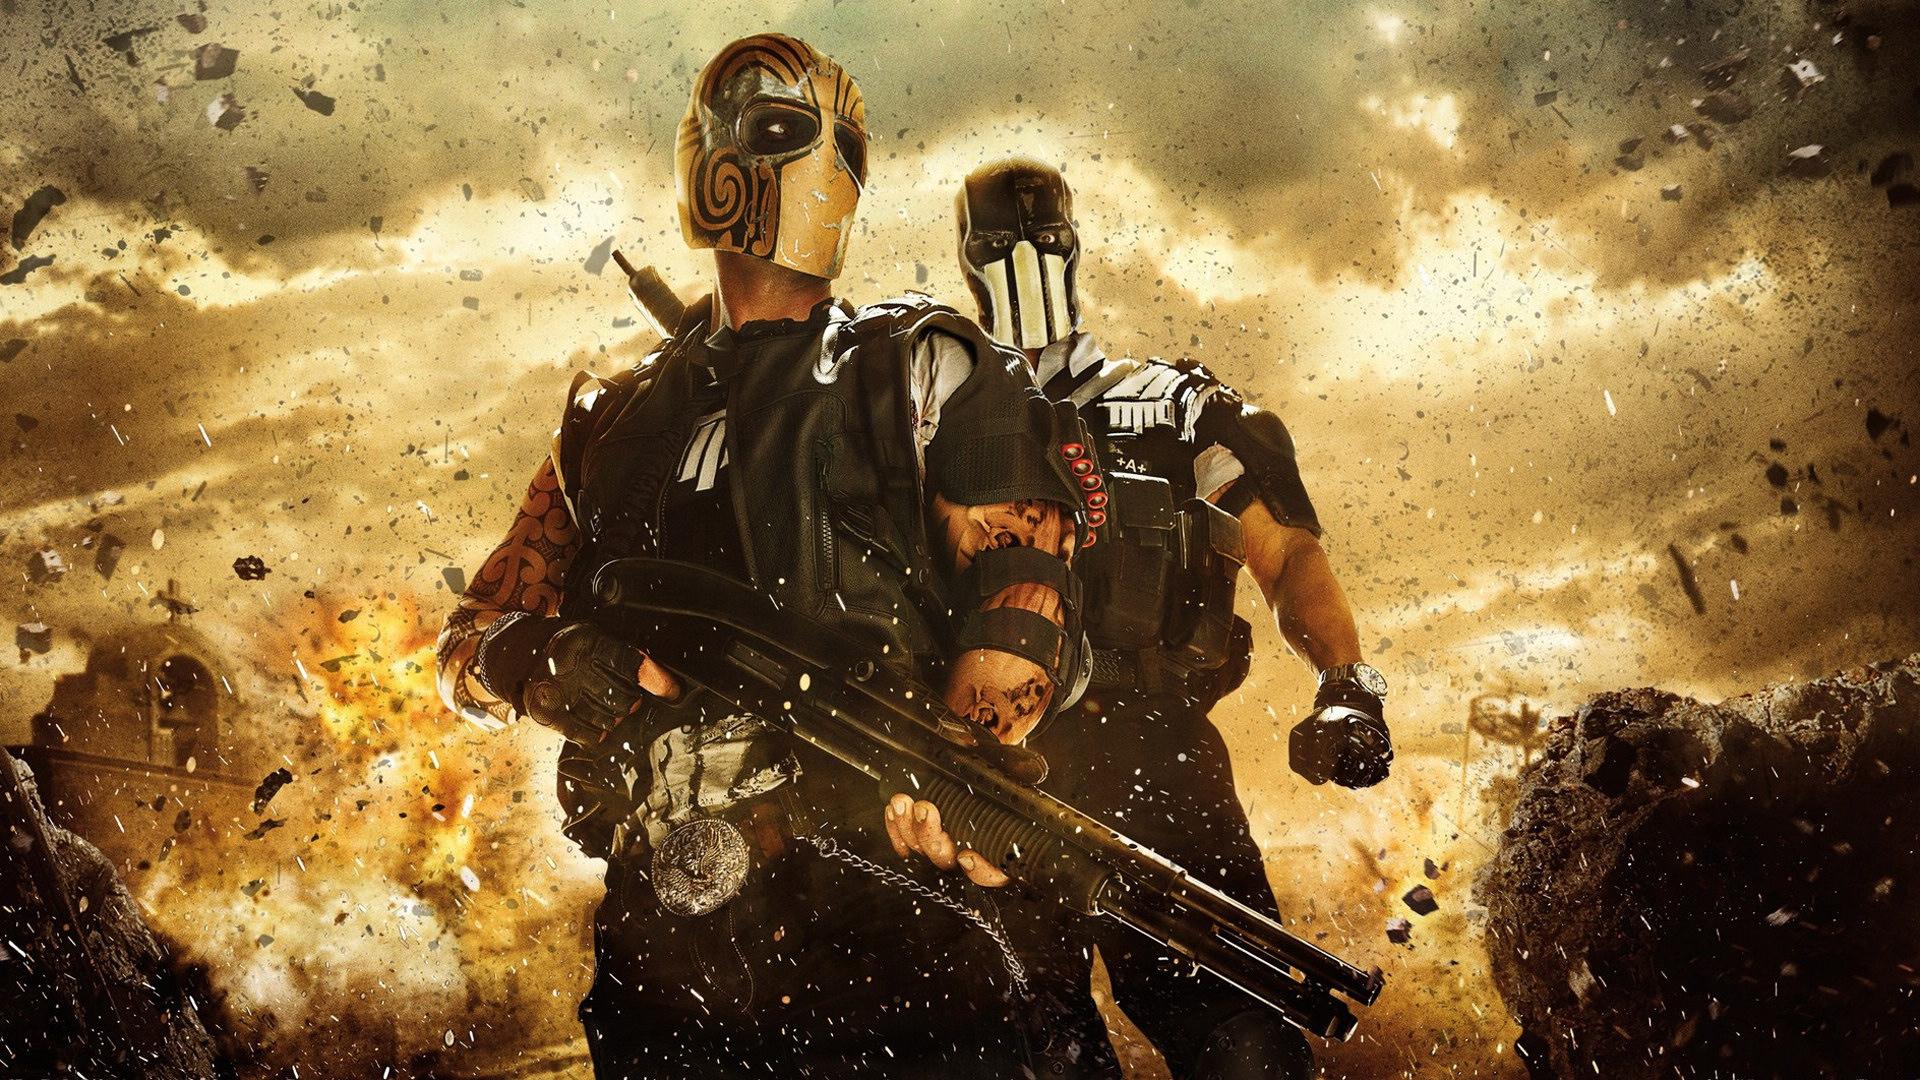 Video Game Army of Two: The Devil's Cartel HD Wallpaper | Background Image